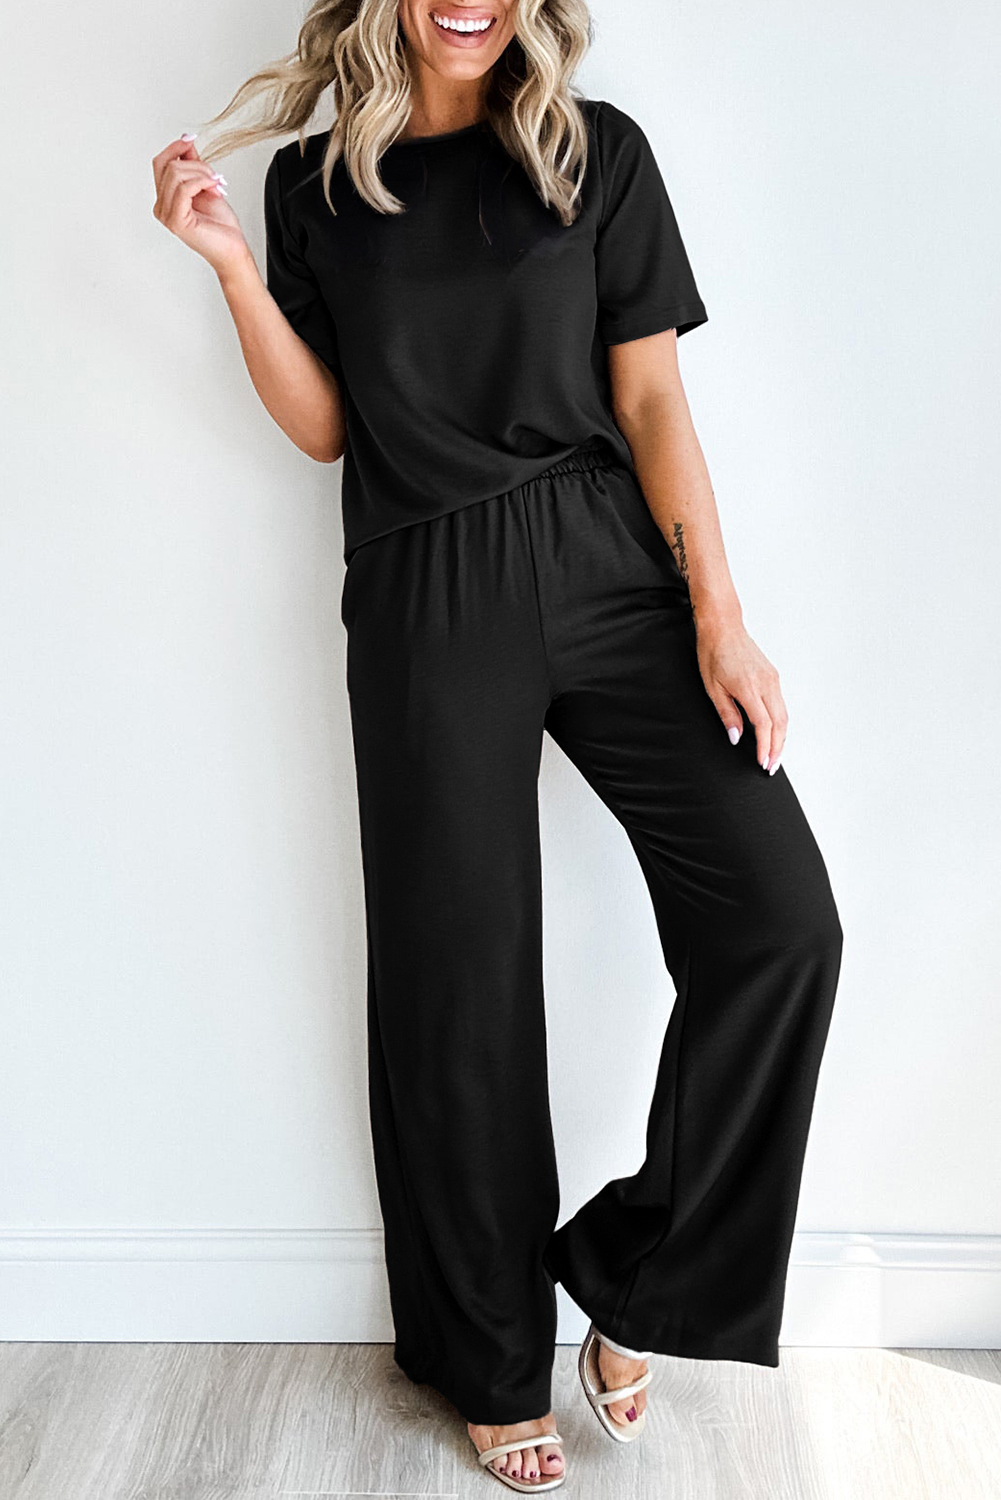 Shewin Wholesale High Quality Black Solid Color T-Shirt and Wide Leg PANTS Set